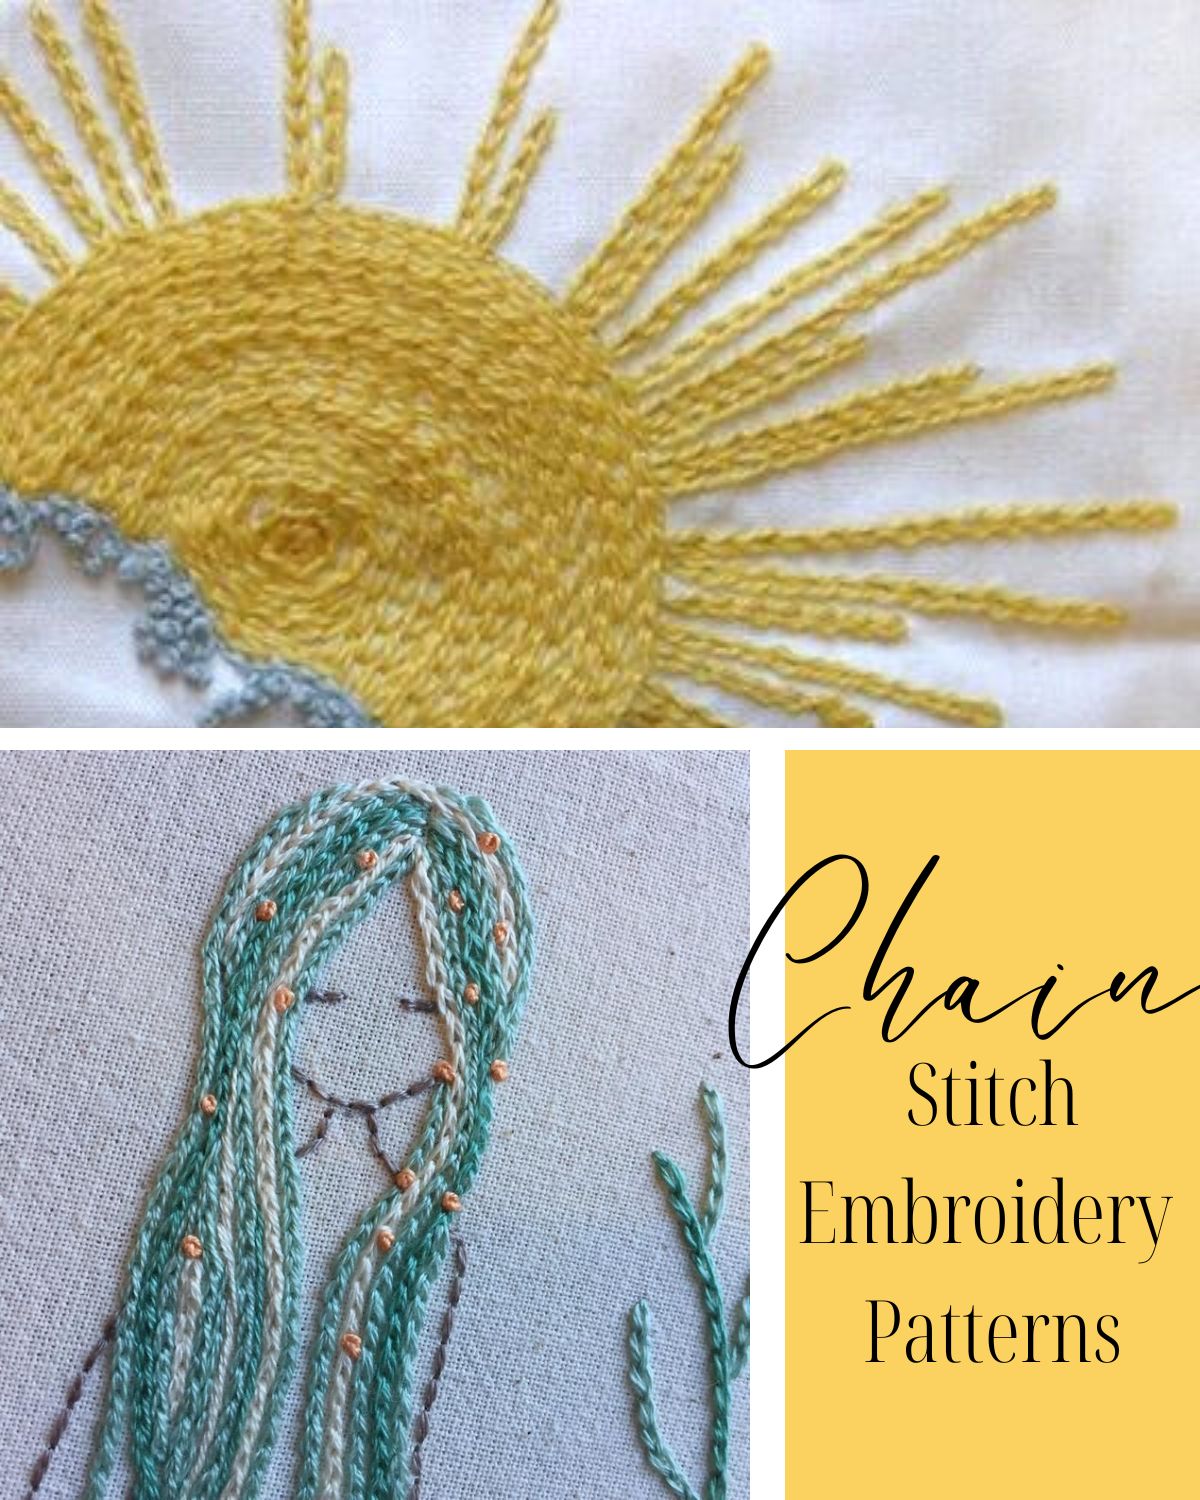 A mermaid and a sun chain stitch embroidery patterns